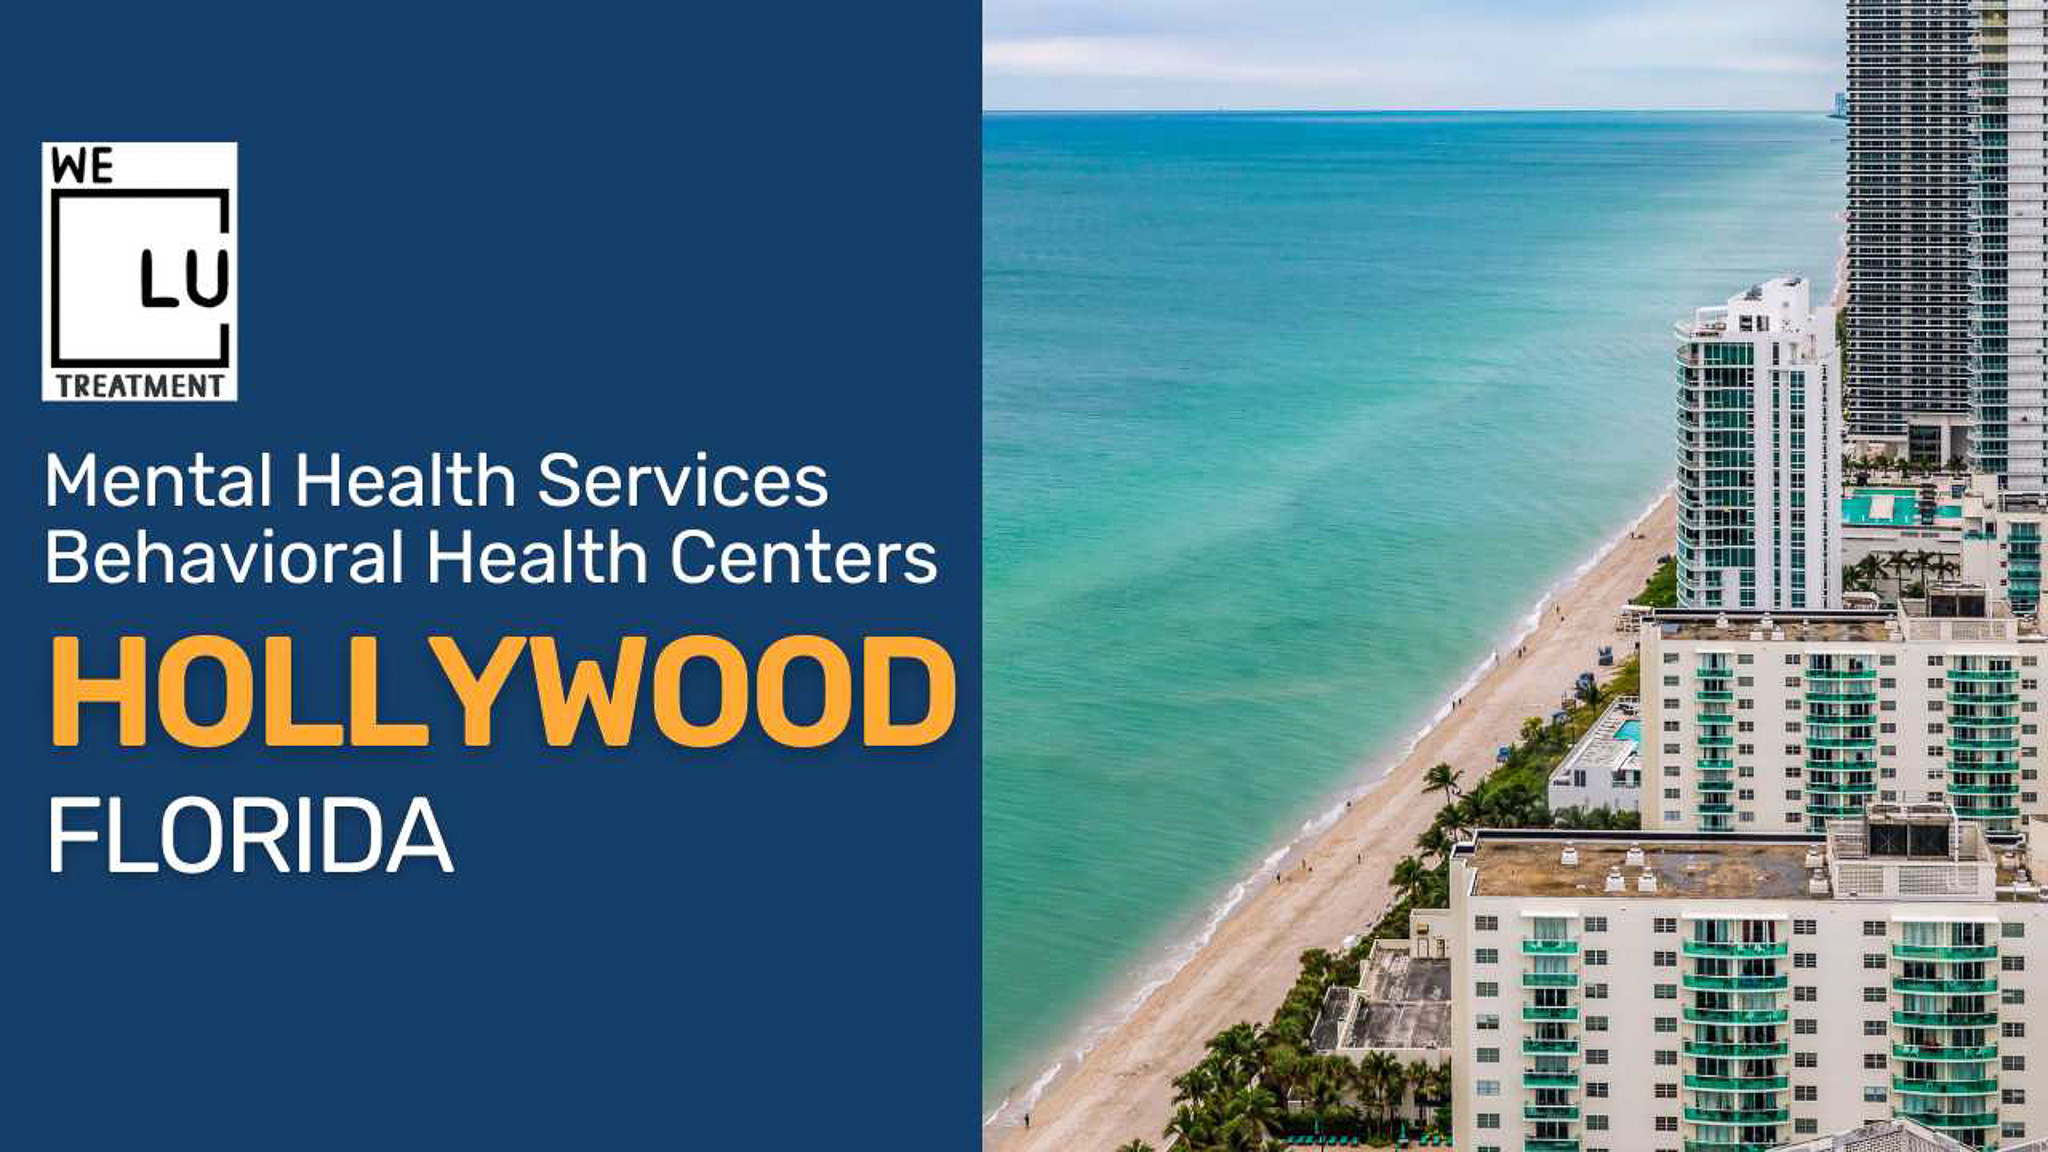 Hollywood FL (MH) We Level Up treatment center for drug and alcohol rehab detox and mental health services - Image 1